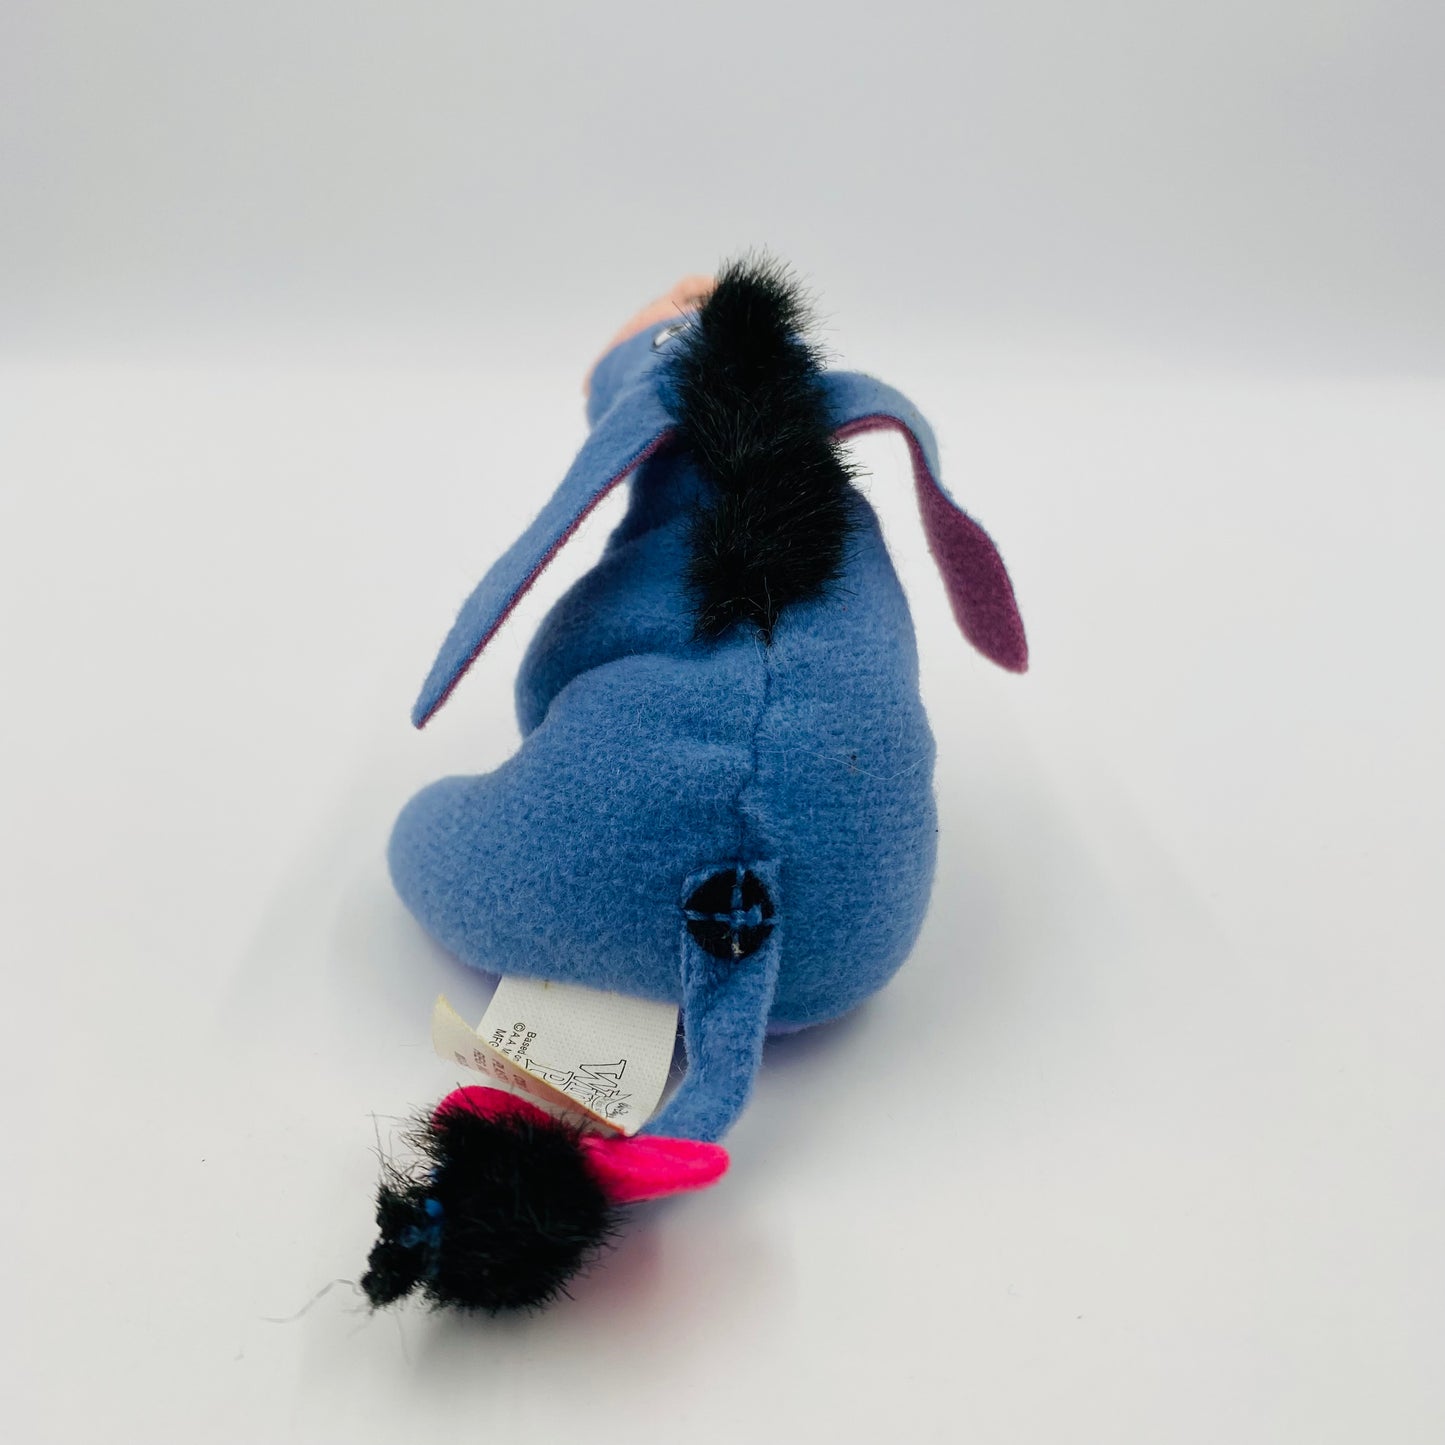 The Many Adventures of Winnie the Pooh Eeyore McDonald's Happy Meal bendable soft toy (2002) loose